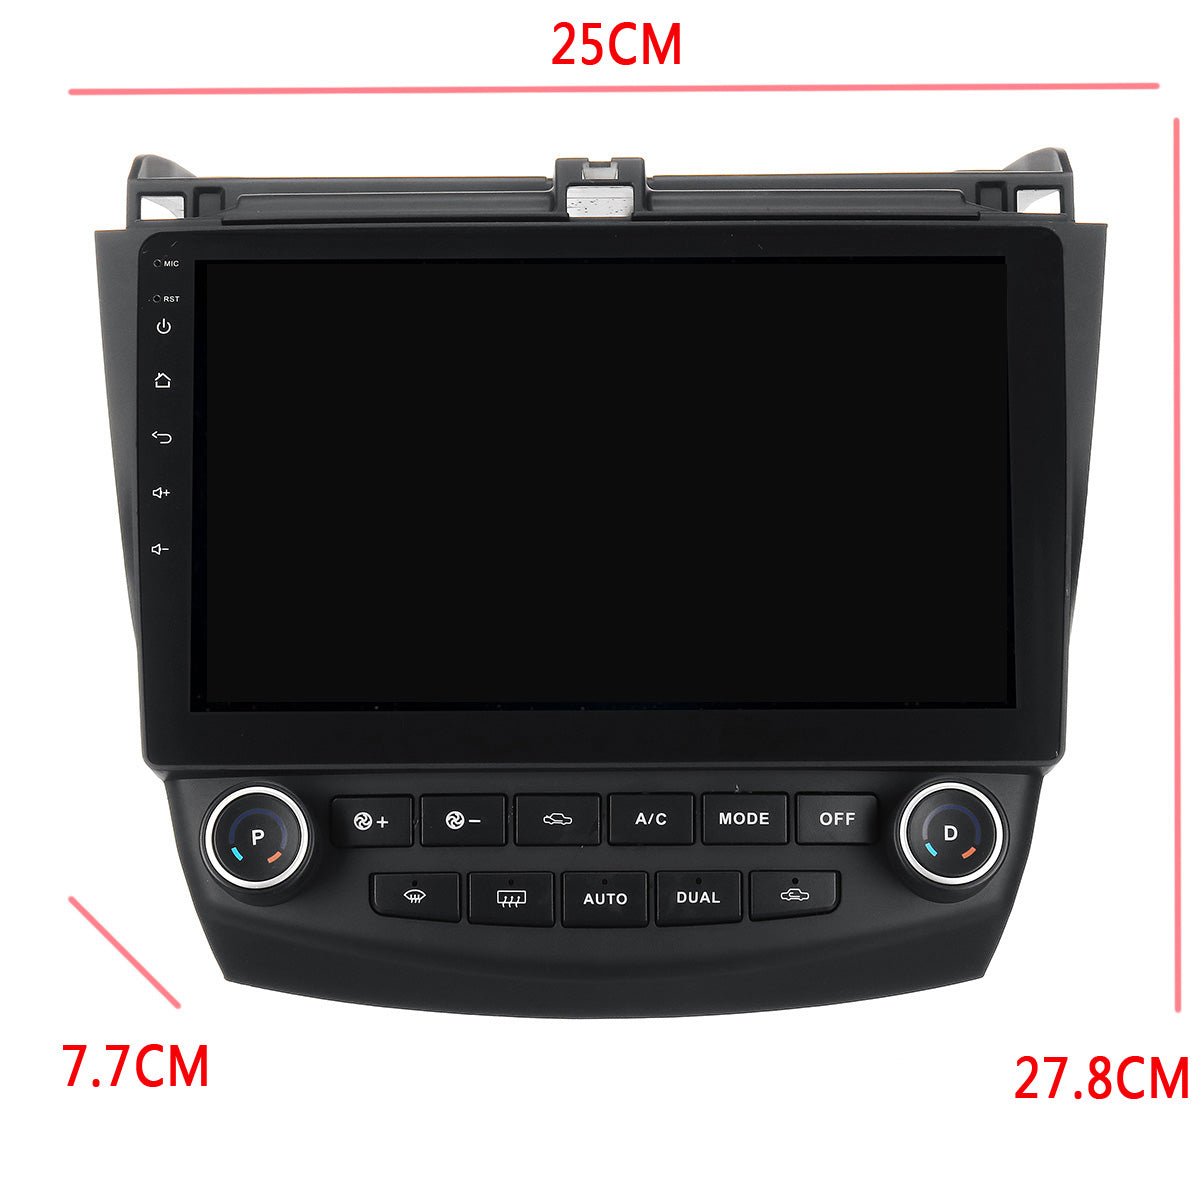 Black YUEHOO 10.1 Inch 2 DIN for Android 8.0 Car Stereo 2+32G Quad Core MP5 Player GPS WIFI 4G AM RDS Radio for Honda Accord 2003-2007